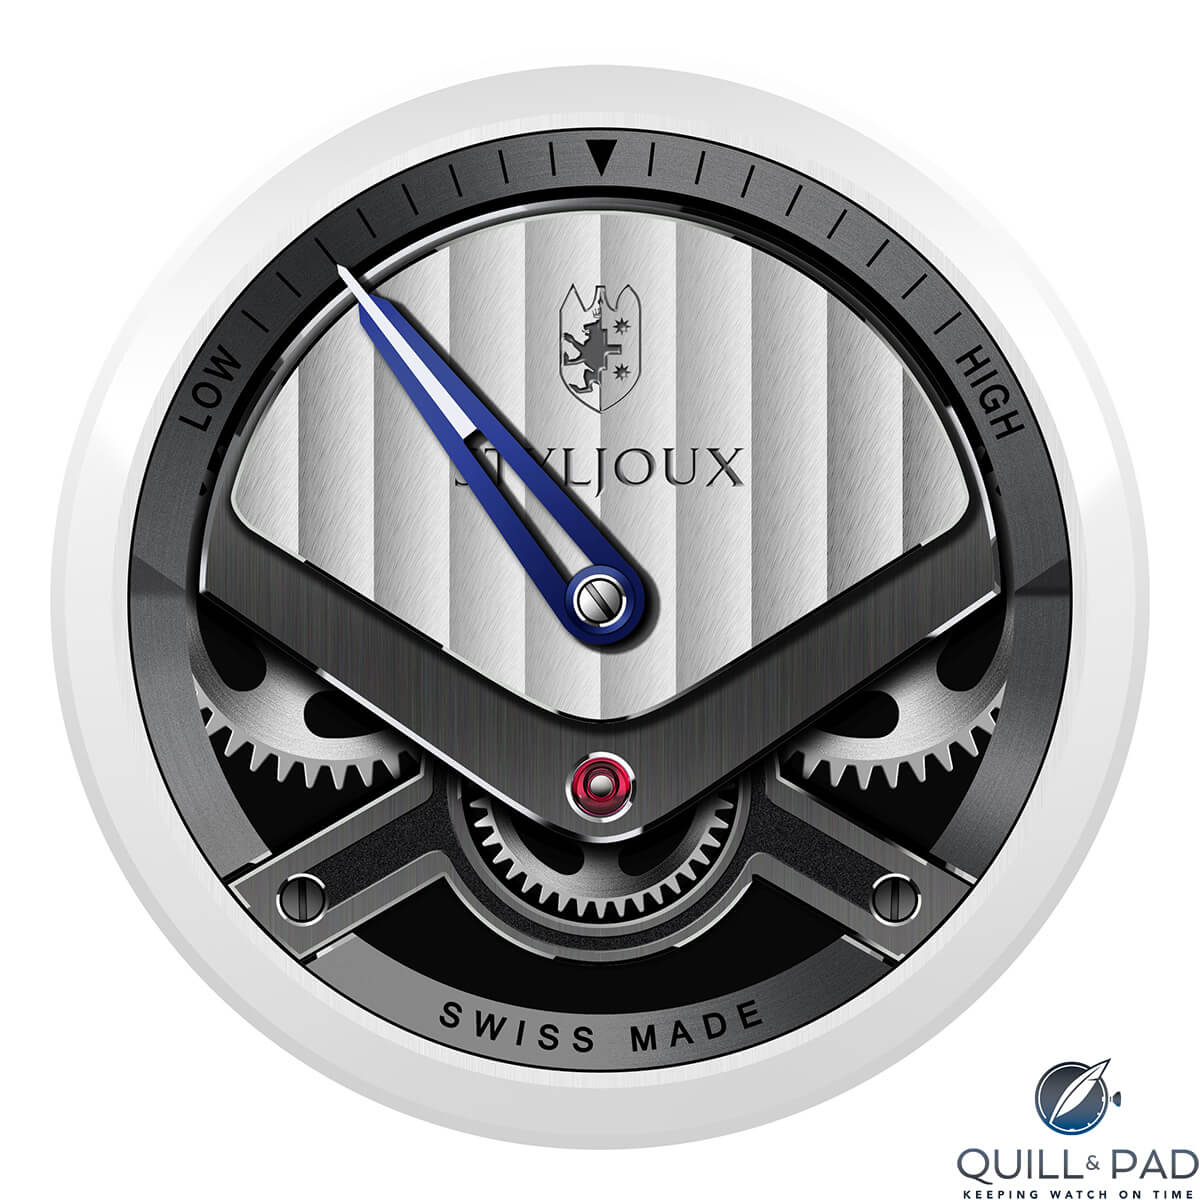 What looks like a De Bethune inspired dial of the Styljoux Le Calibre pen with the blue hand indicating the center of balance